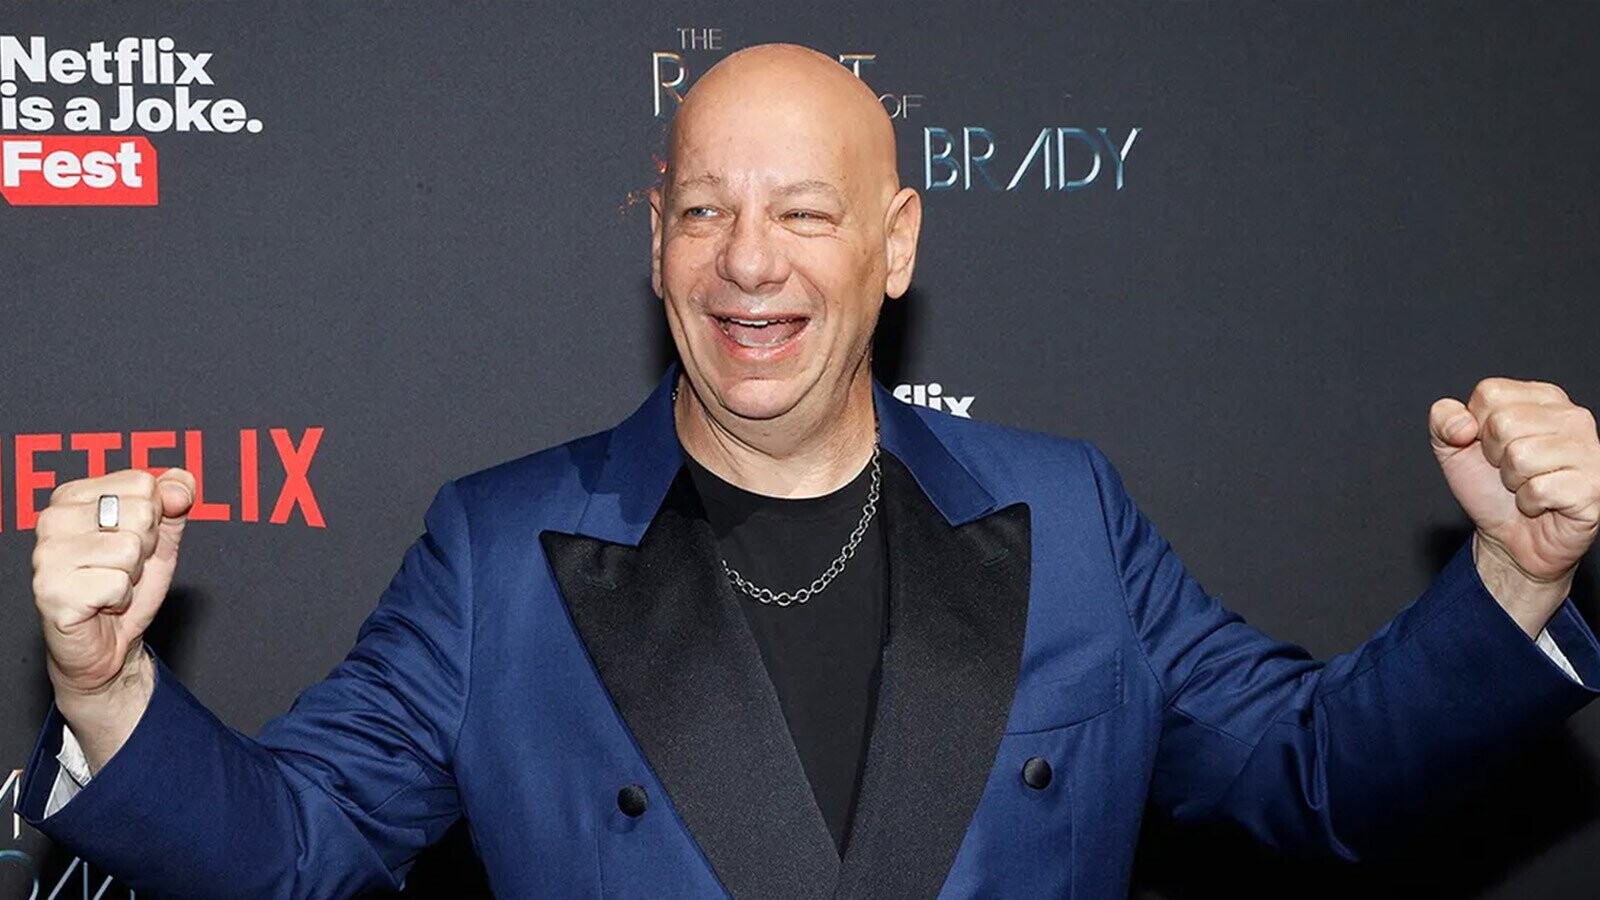 A School Bully Got Jeff Ross Into the Roasting Business